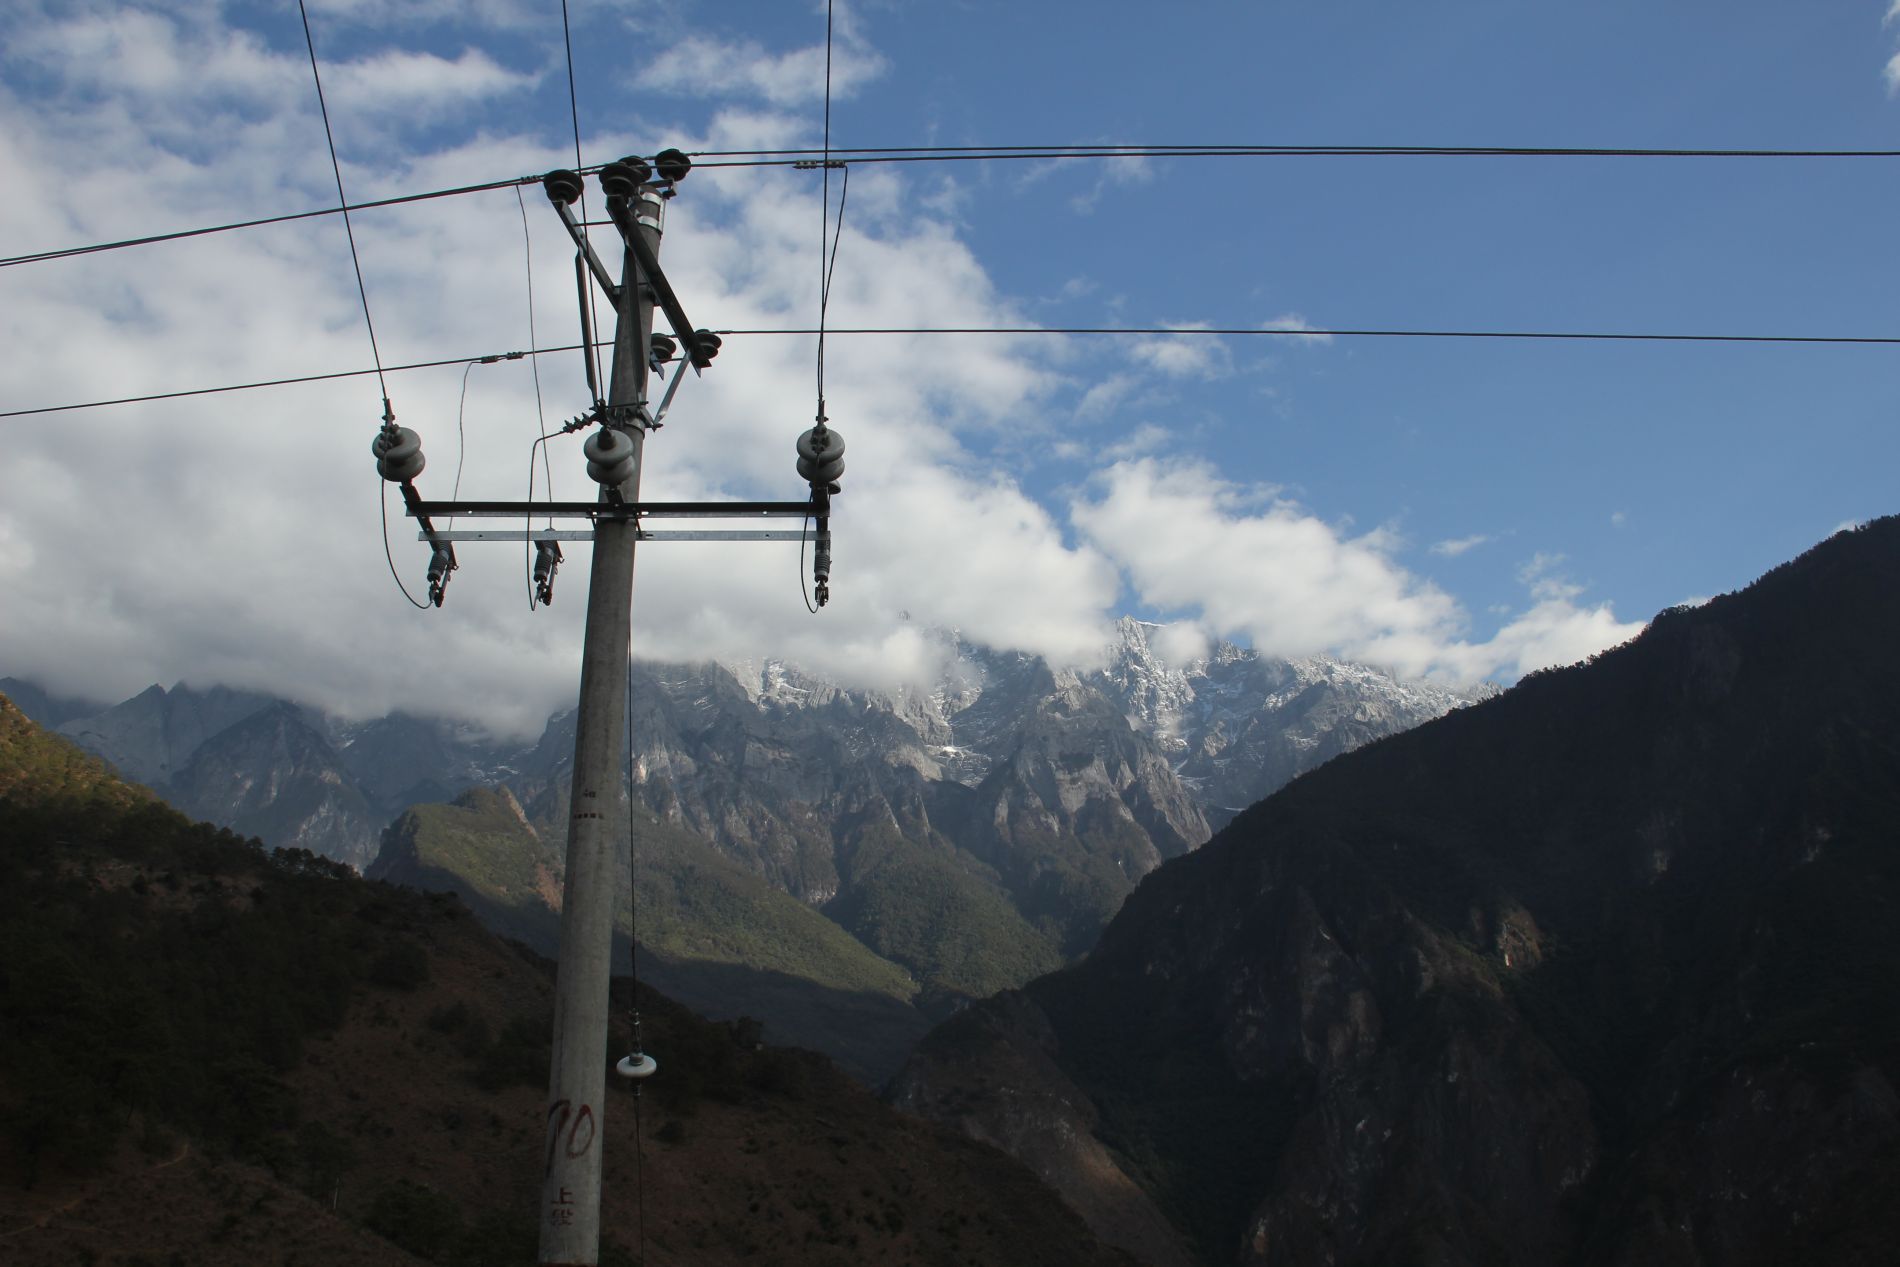 Signs of development are starting to creep into China's Tiger Leaping Gorge.